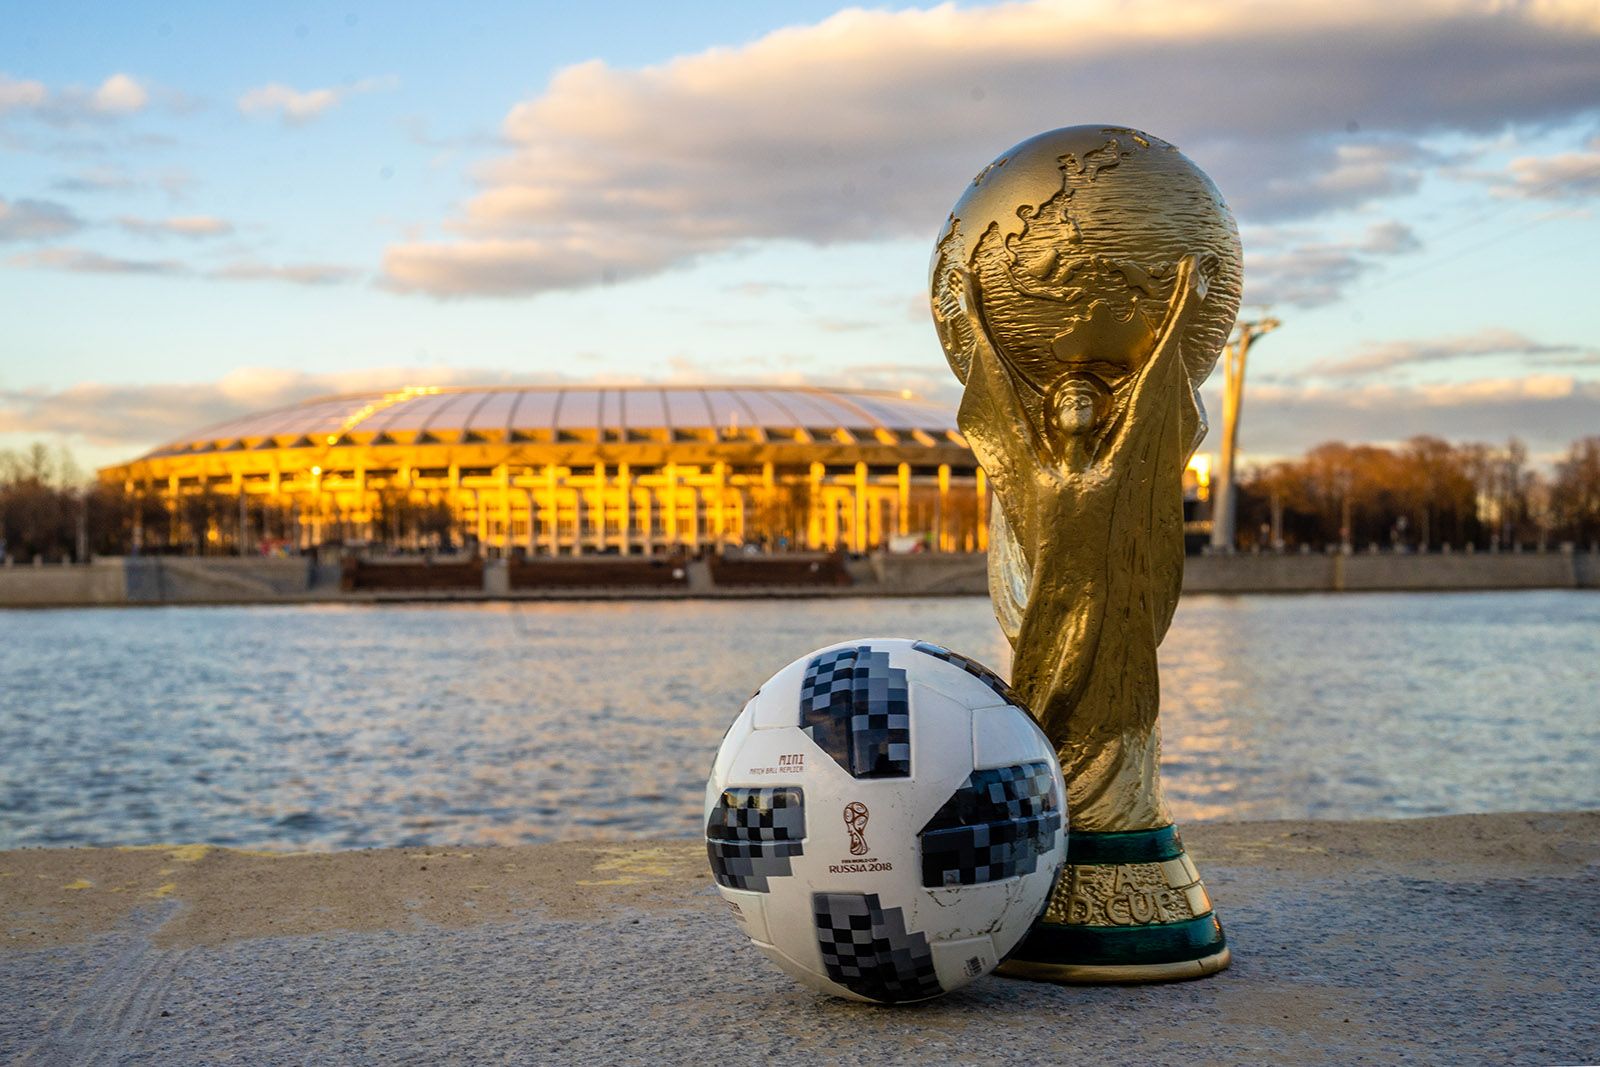 BBC iPlayer to stream all BBC World Cup 2018 matches in 4K HDR